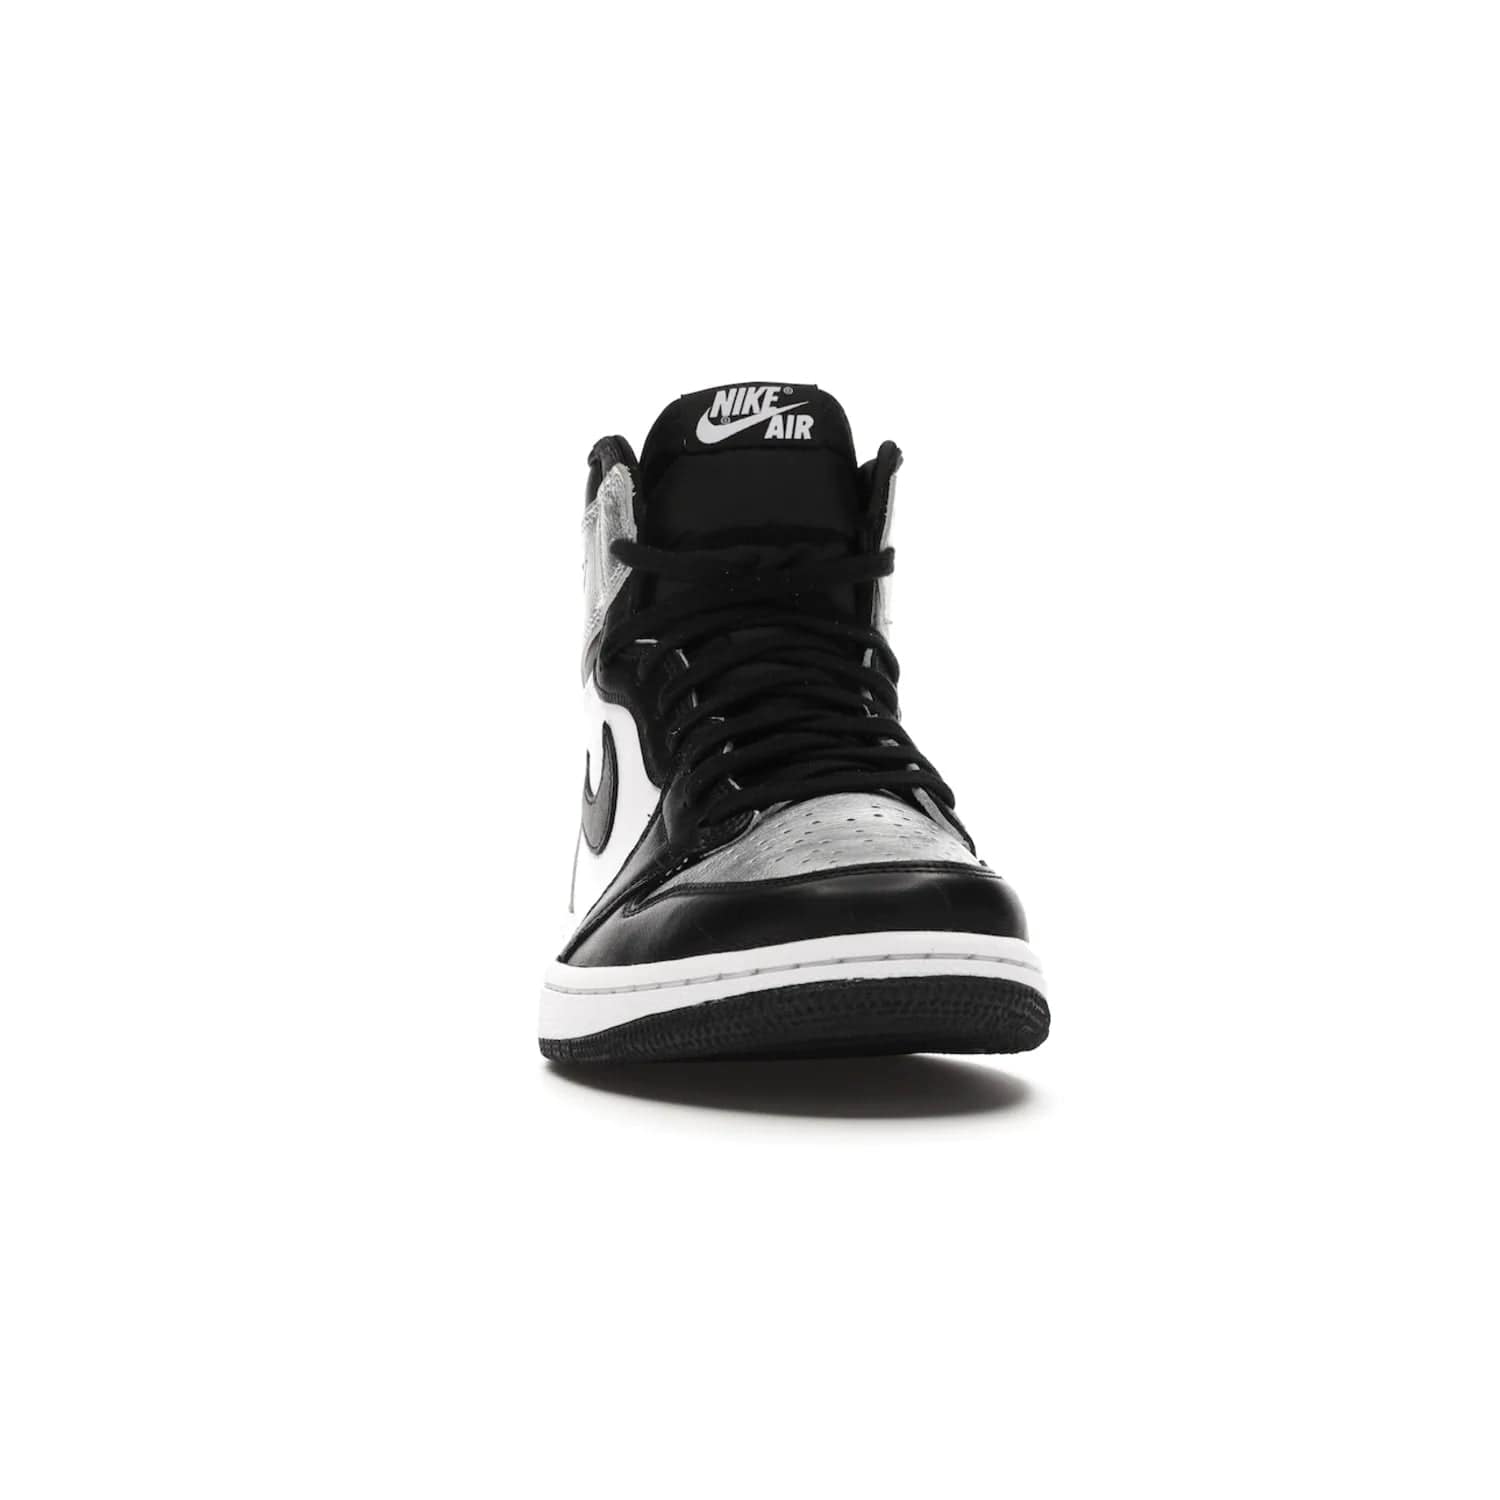 Jordan 1 Retro High Silver Toe (Women's) - Image 9 - Only at www.BallersClubKickz.com - Introducing the Jordan 1 Retro High Silver Toe (Women's): an updated spin on the iconic 'Black Toe' theme. Featuring white & black leather and silver patent leather construction. Nike Air branding, Air Jordan Wings logo, and white/black sole finish give a classic look. The perfect addition to an on-trend streetwear look. Available in classic black & white, this Jordan 1 is an instant classic. Released in February 202